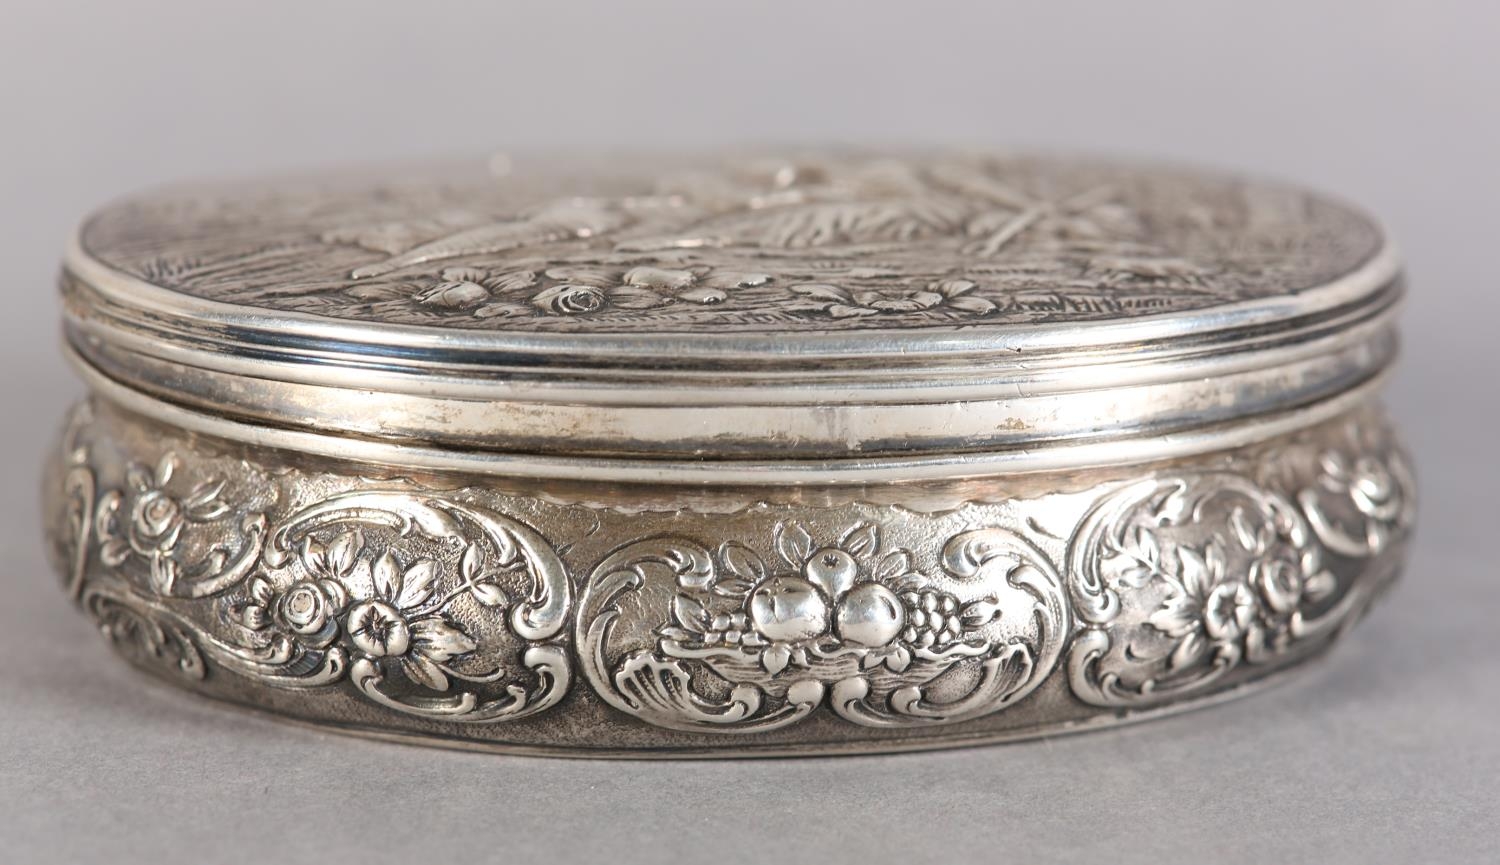 A 19TH CENTURY SILVER BOX, LONDON (import) 1897 for William Moering of oval outline the hinged lid - Image 2 of 5